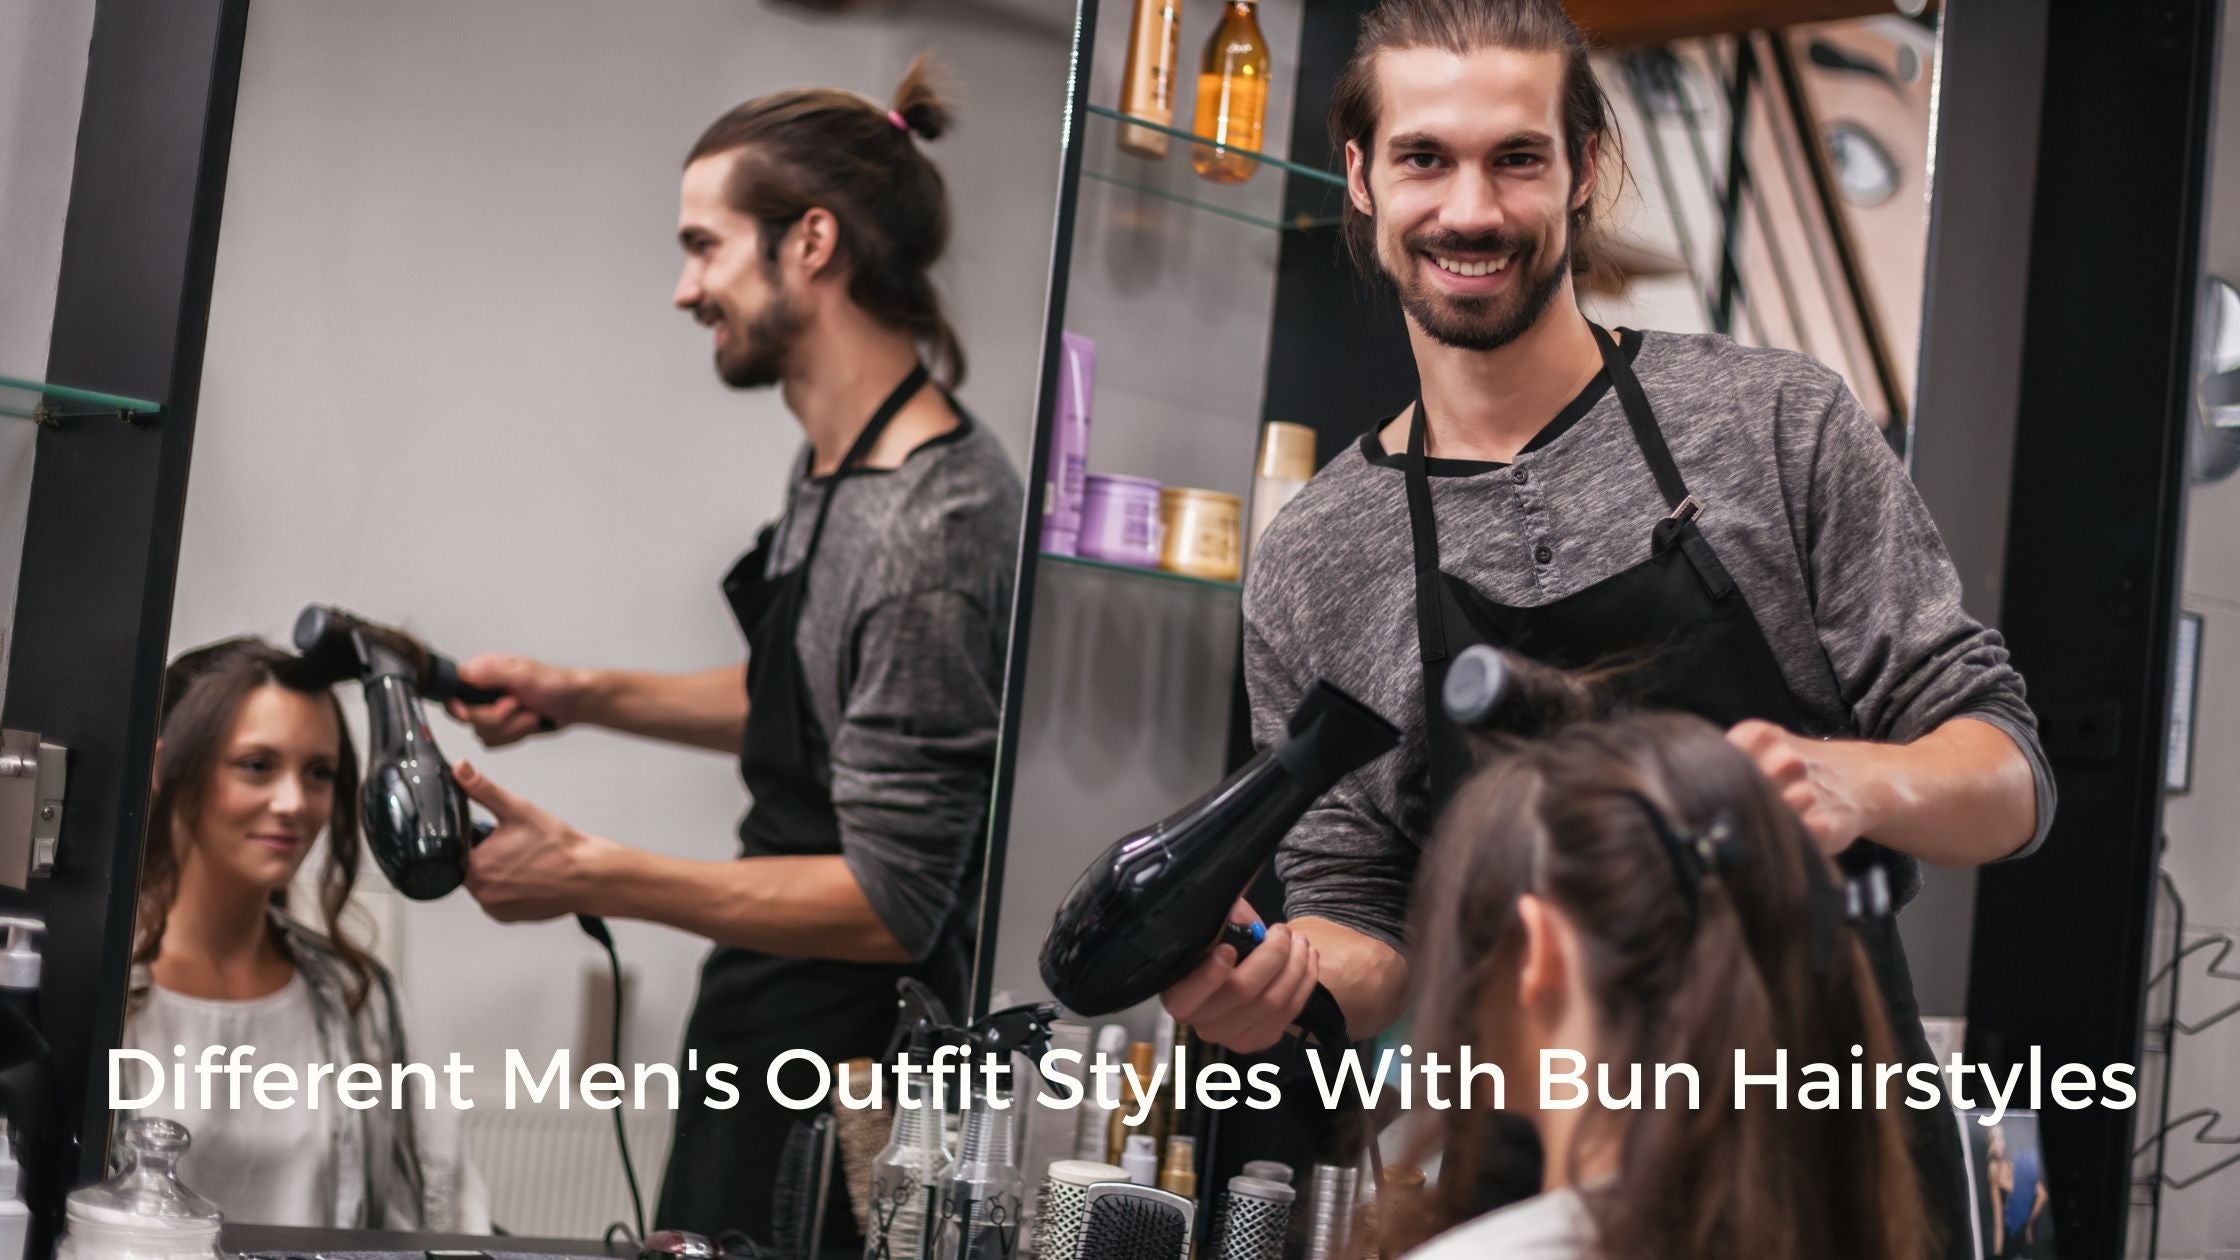 Different Men's Outfit Styles With Bun Hairstyles